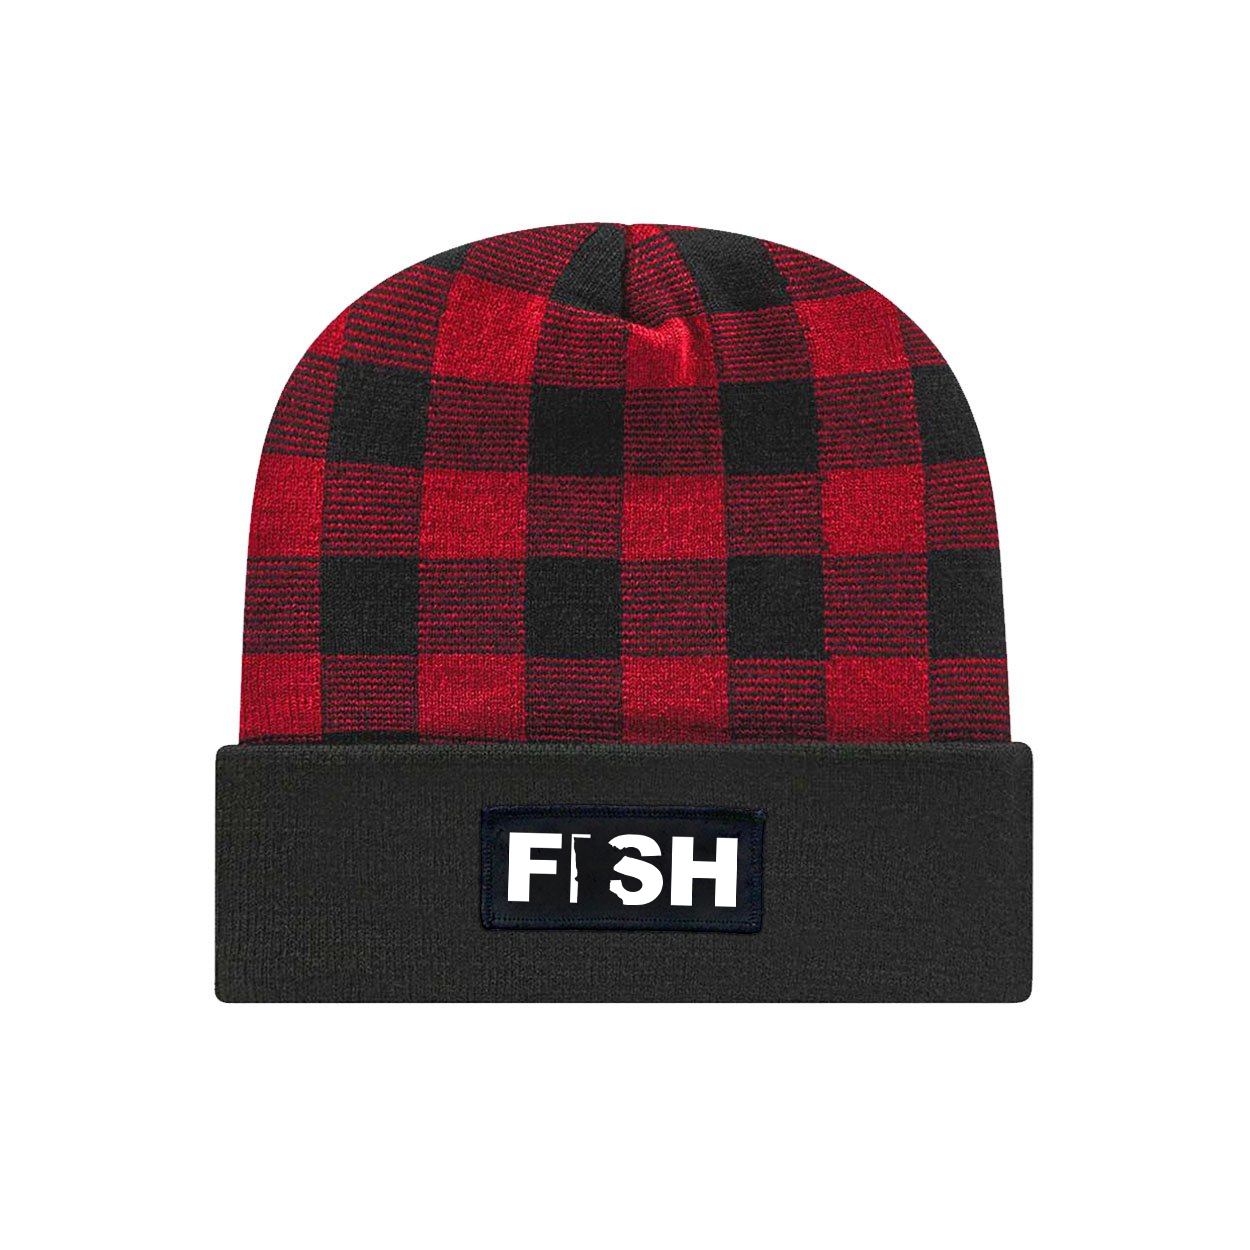 Fish Minnesota Night Out Woven Patch Roll Up Plaid Beanie Black/True Red (White Logo)